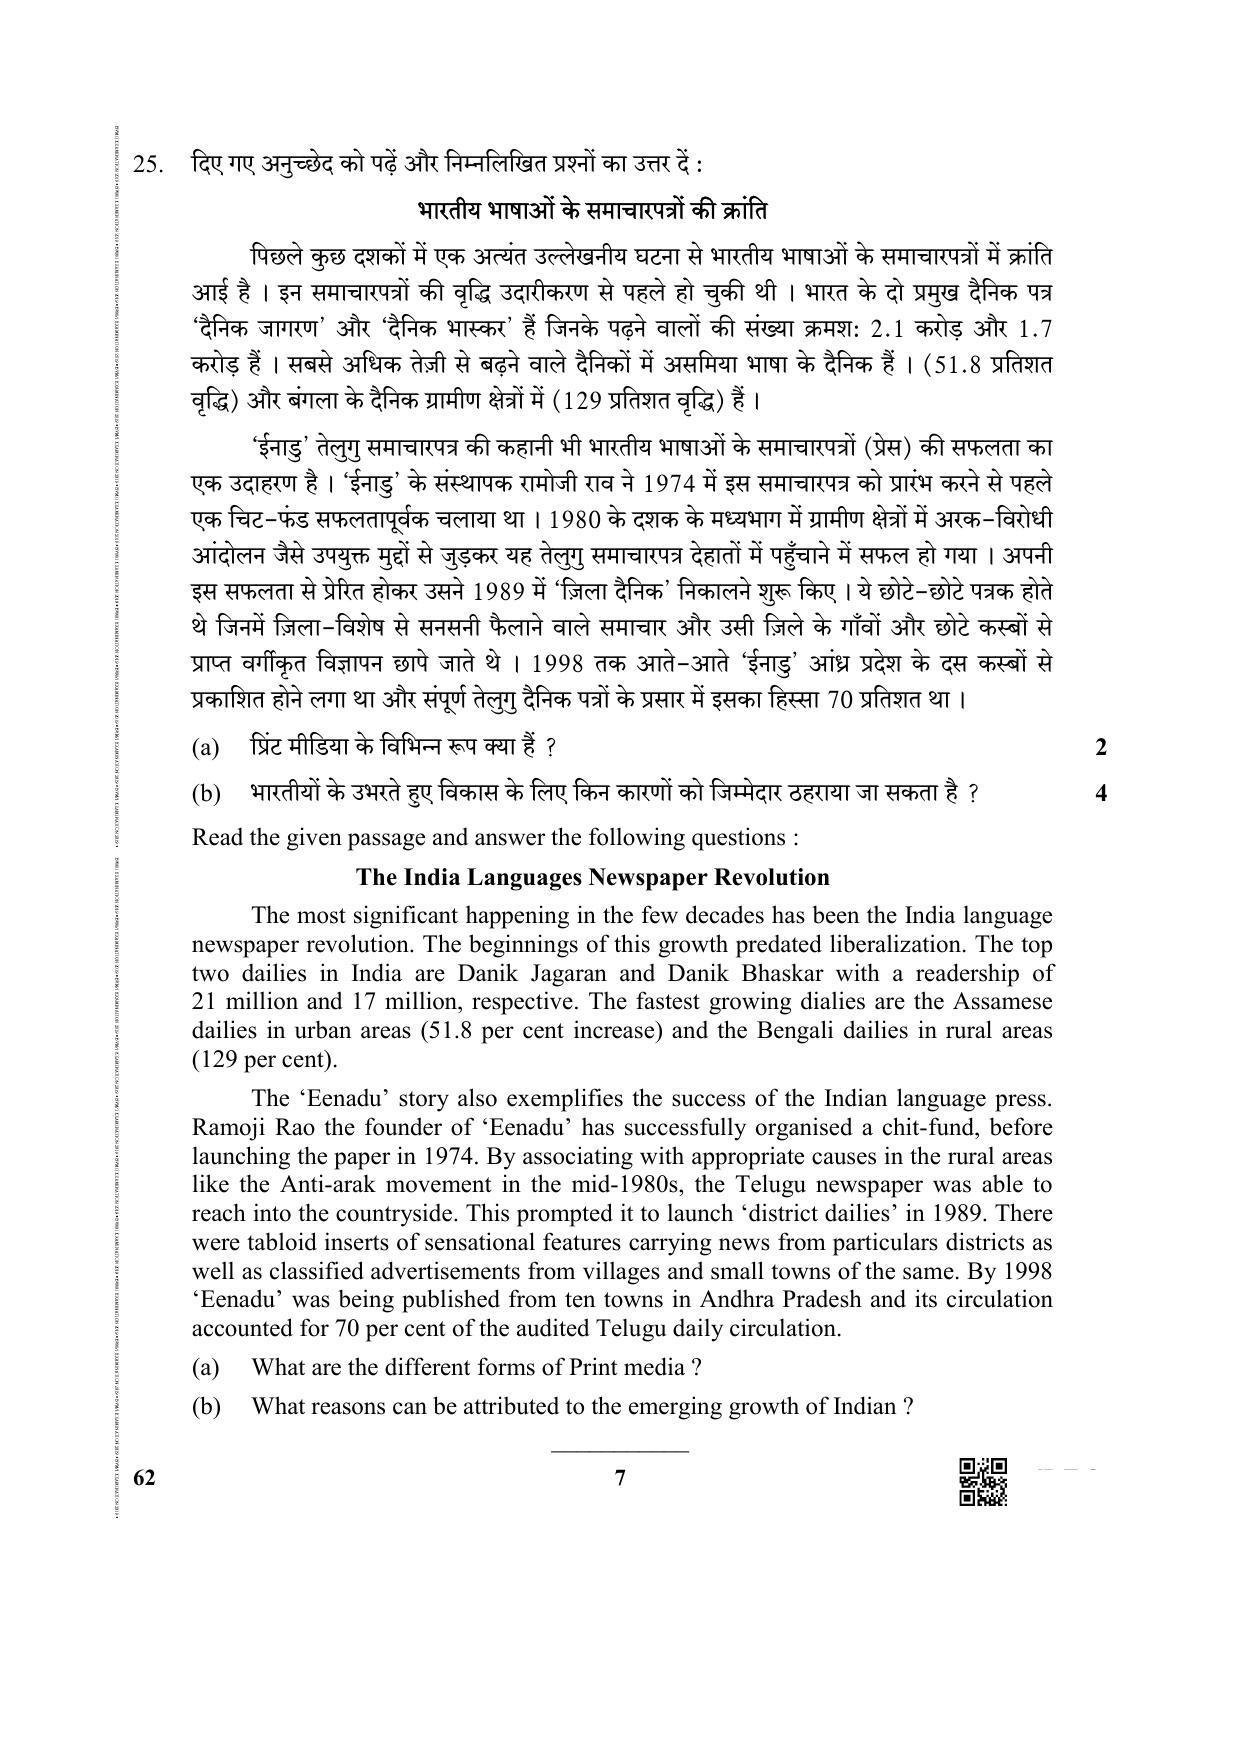 CBSE Class 12 62 (Sociology) 2019 Question Paper - Page 7